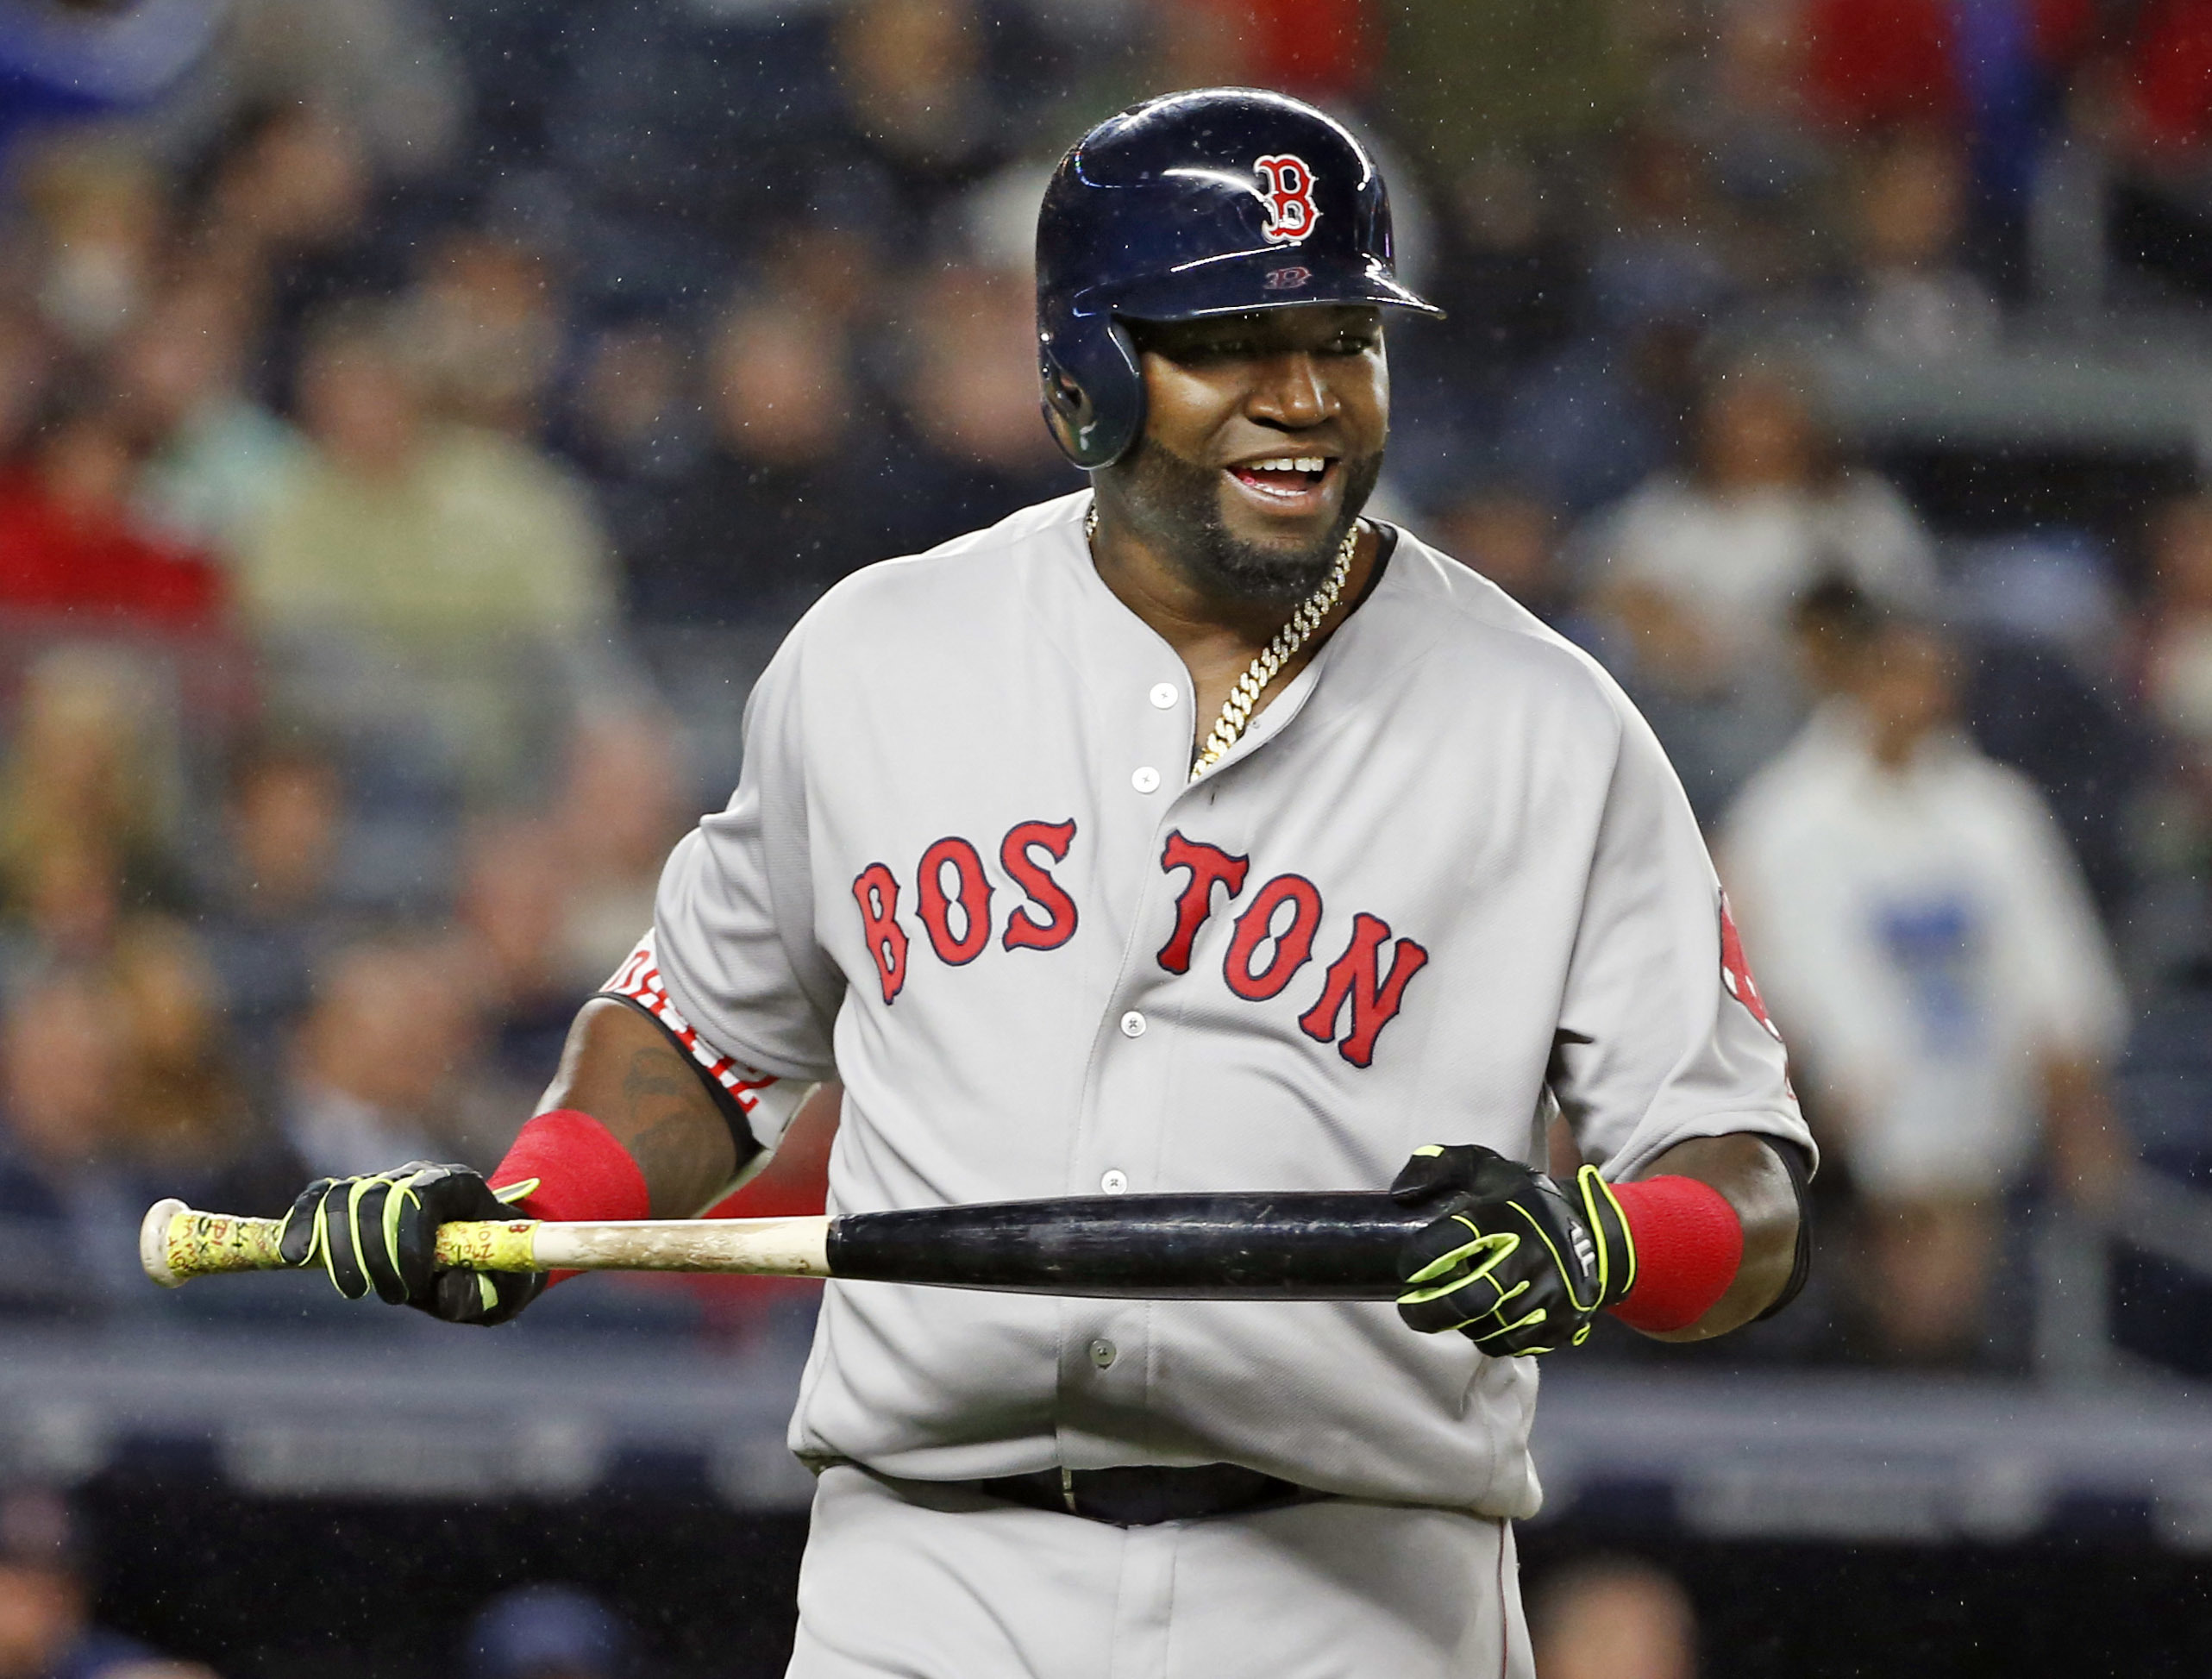 Ortiz, Clemens, Bonds to Be Close Calls for Hall of Fame